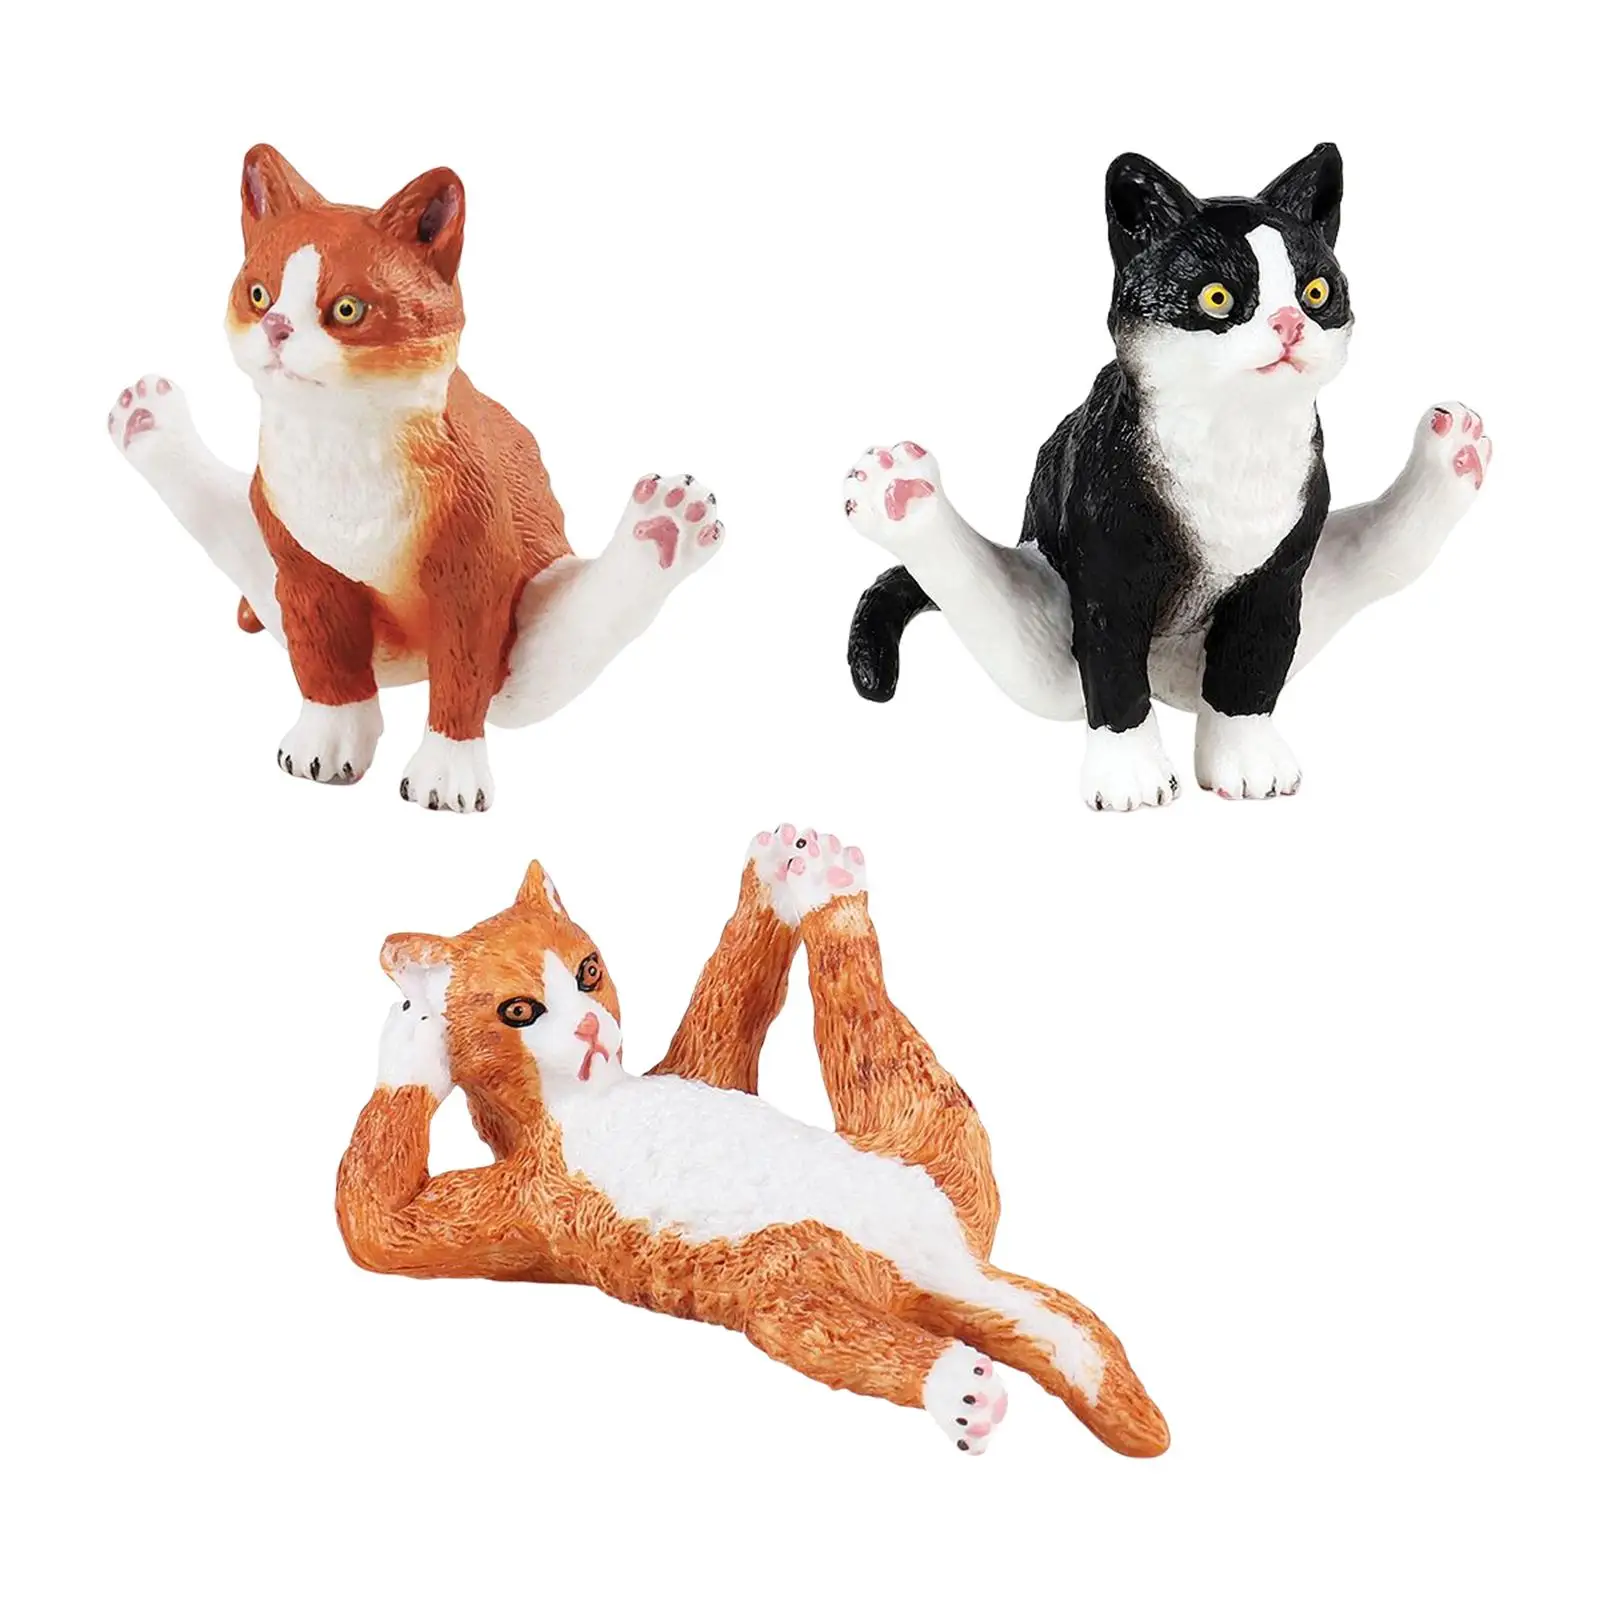 Simulation Cat Figurines Cat Figures Collection Playset Figures Artifical Figurine for Home Decor